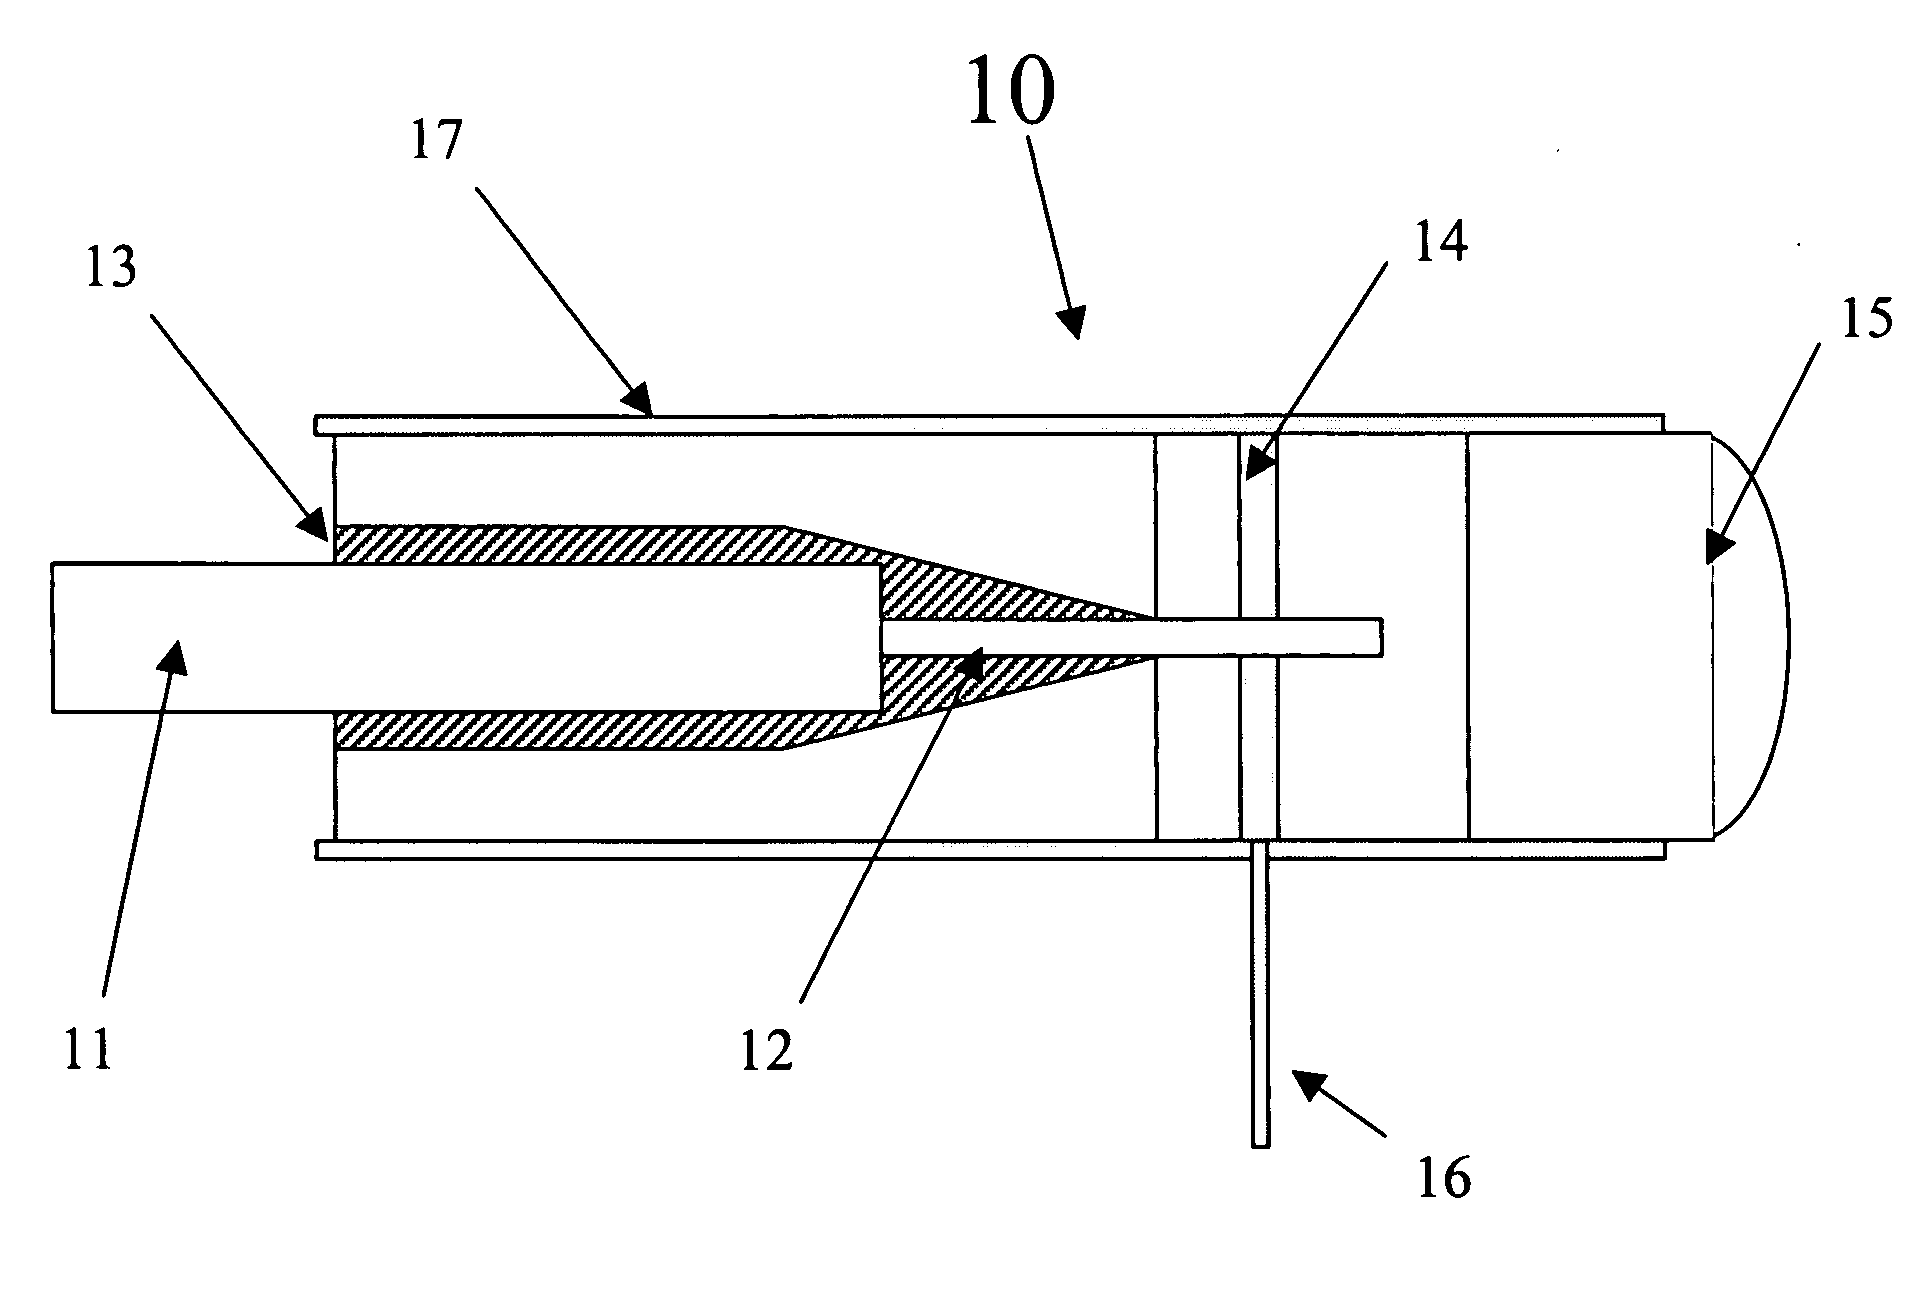 Dynamic micro-positioner and aligner